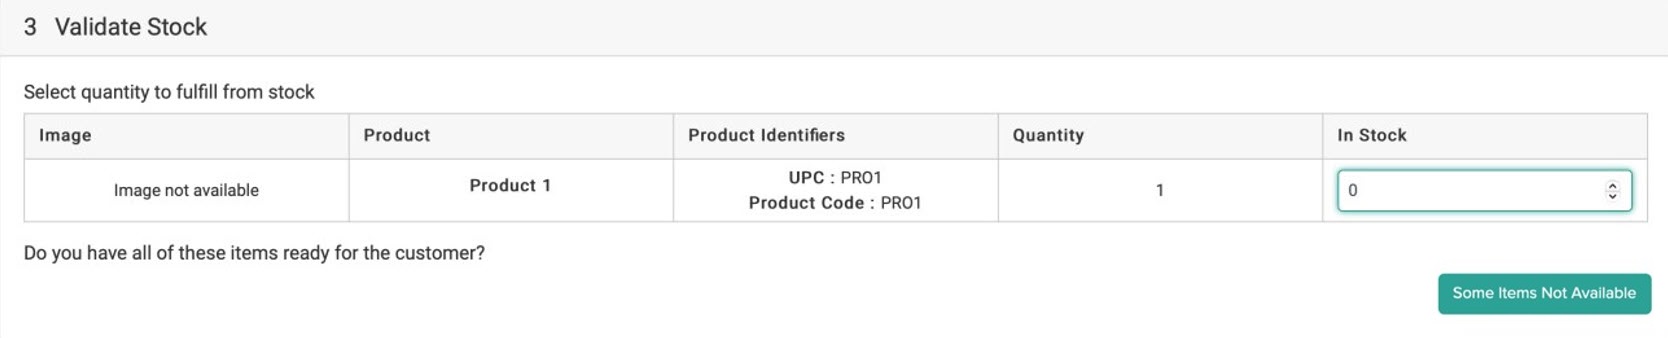 Example of the Validate Stock step with 0 items in stock and the Some Items Not Available button